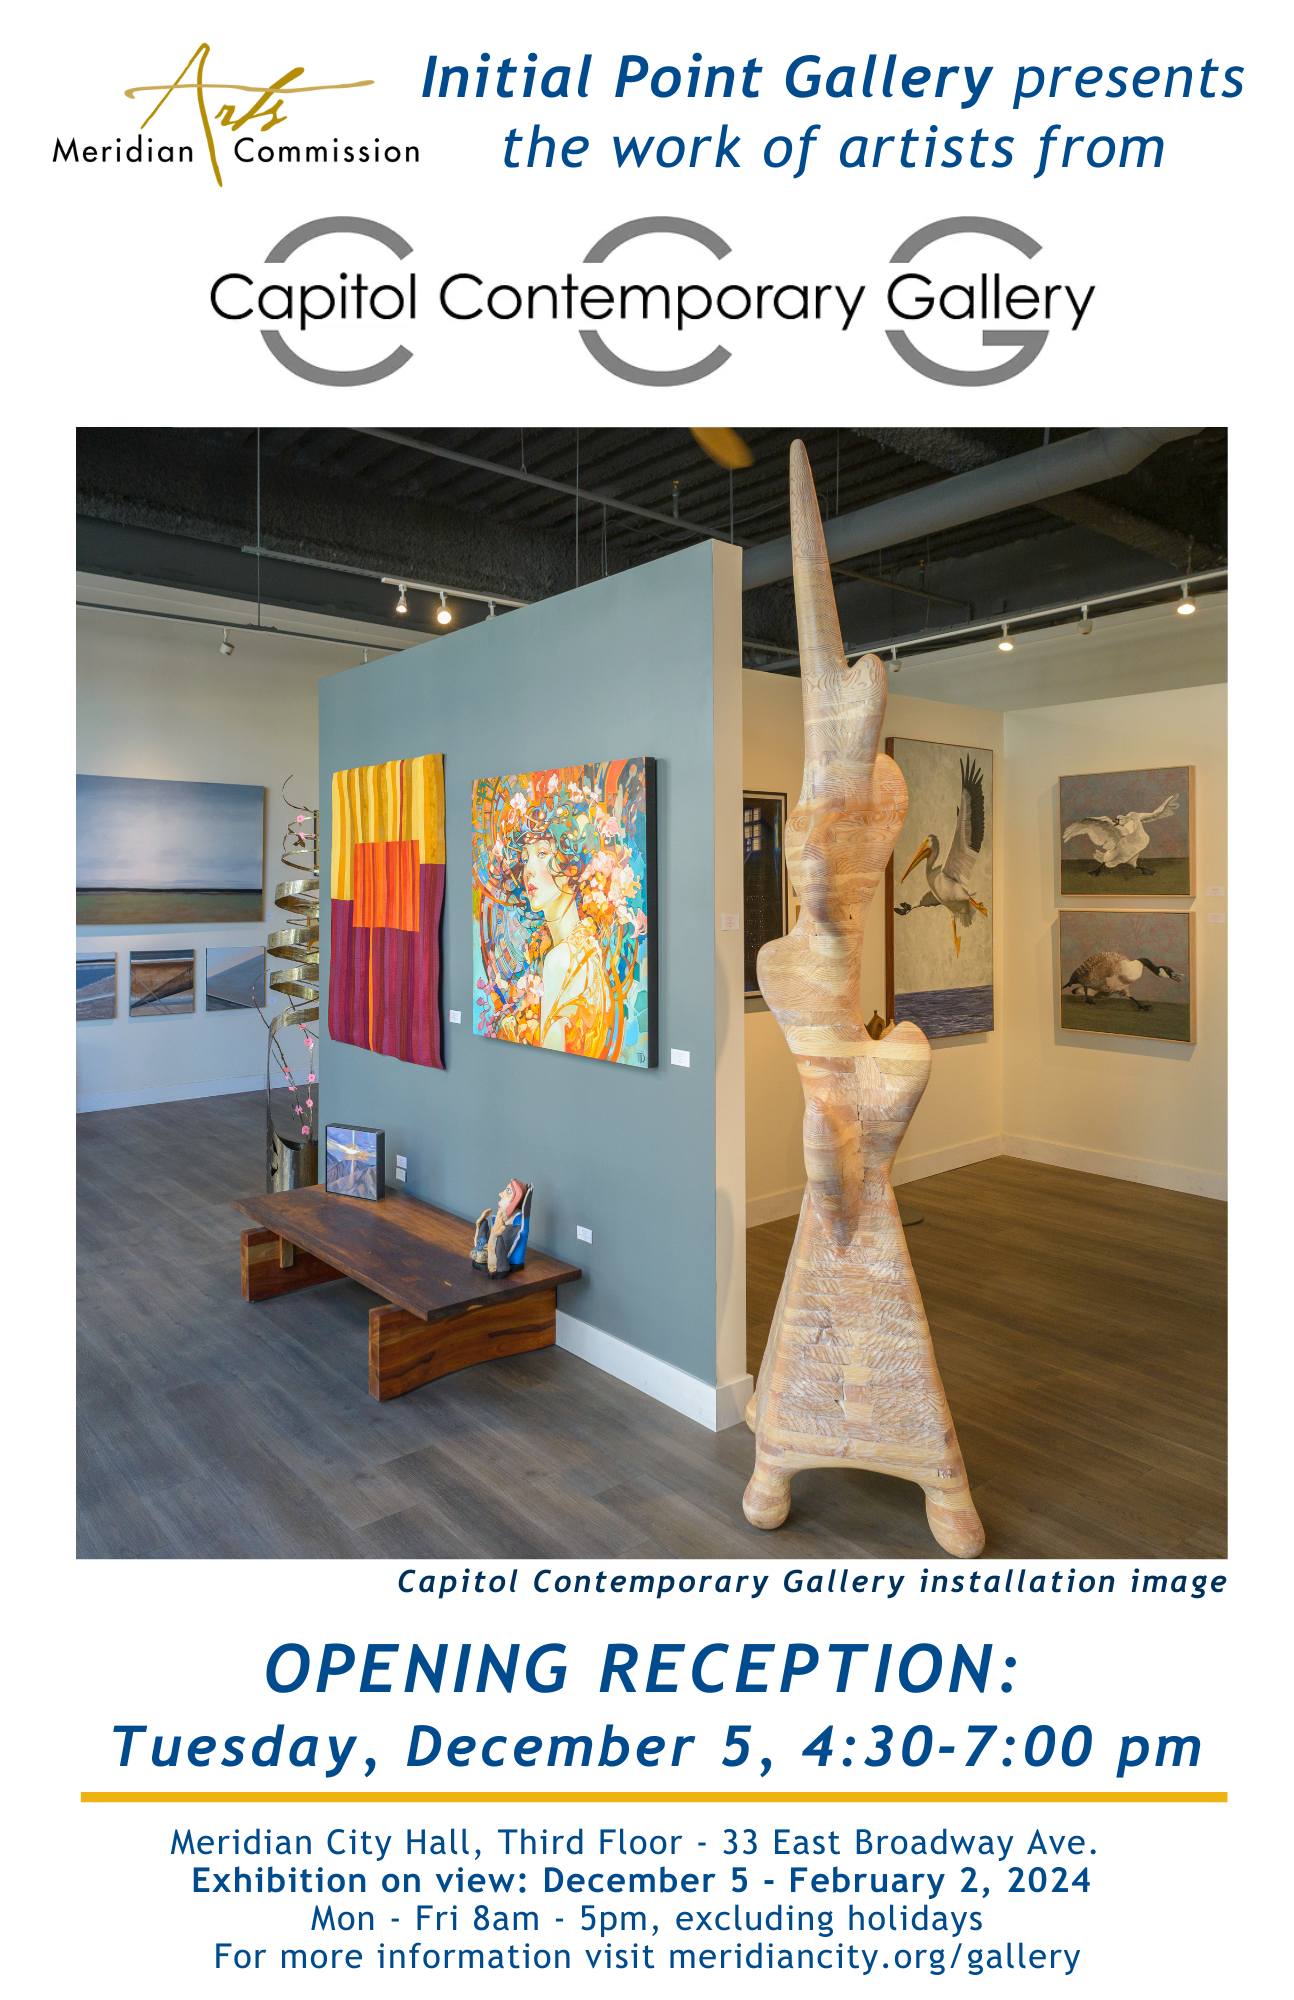 Initial Point Gallery Artist Reception Details for December 2023